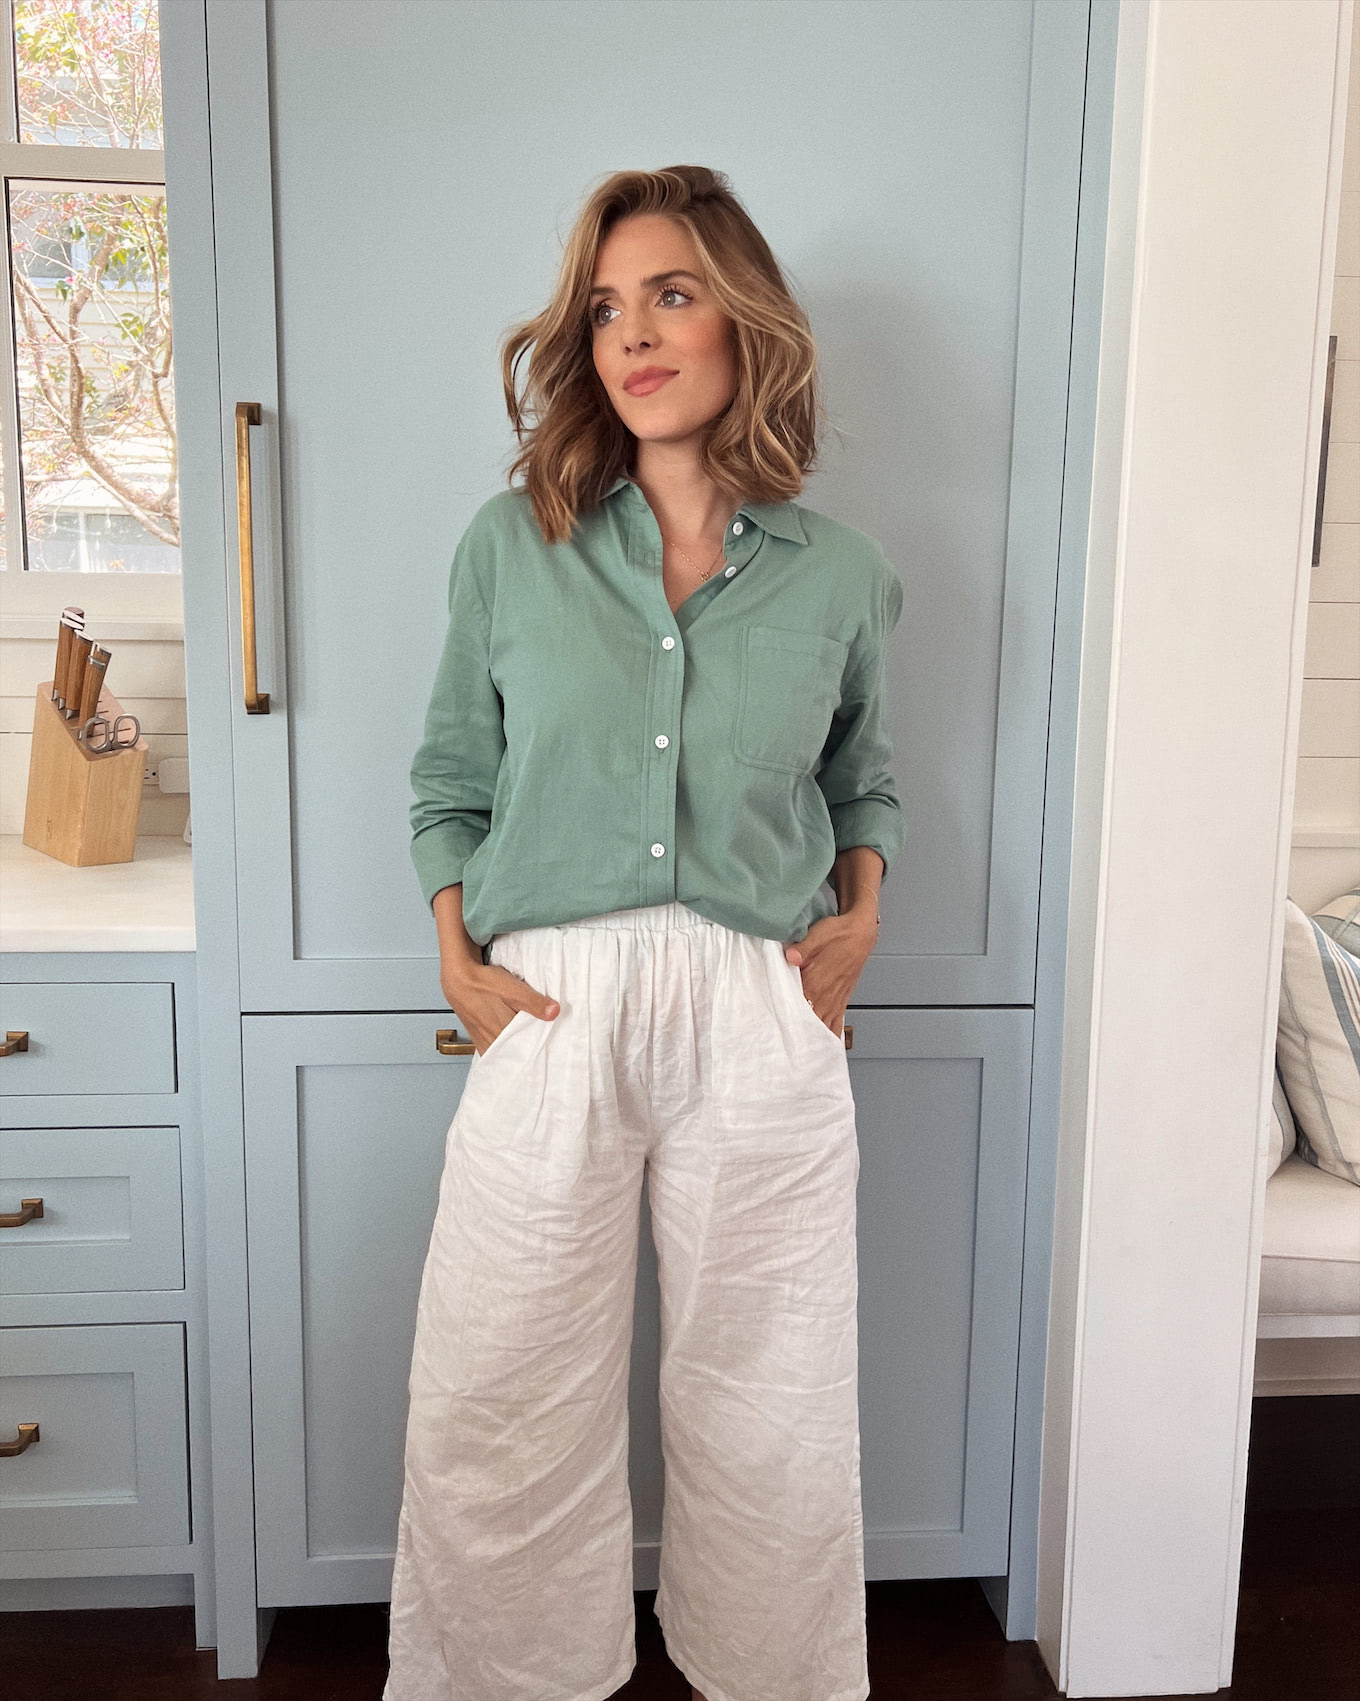 teal collared button down white linen pants